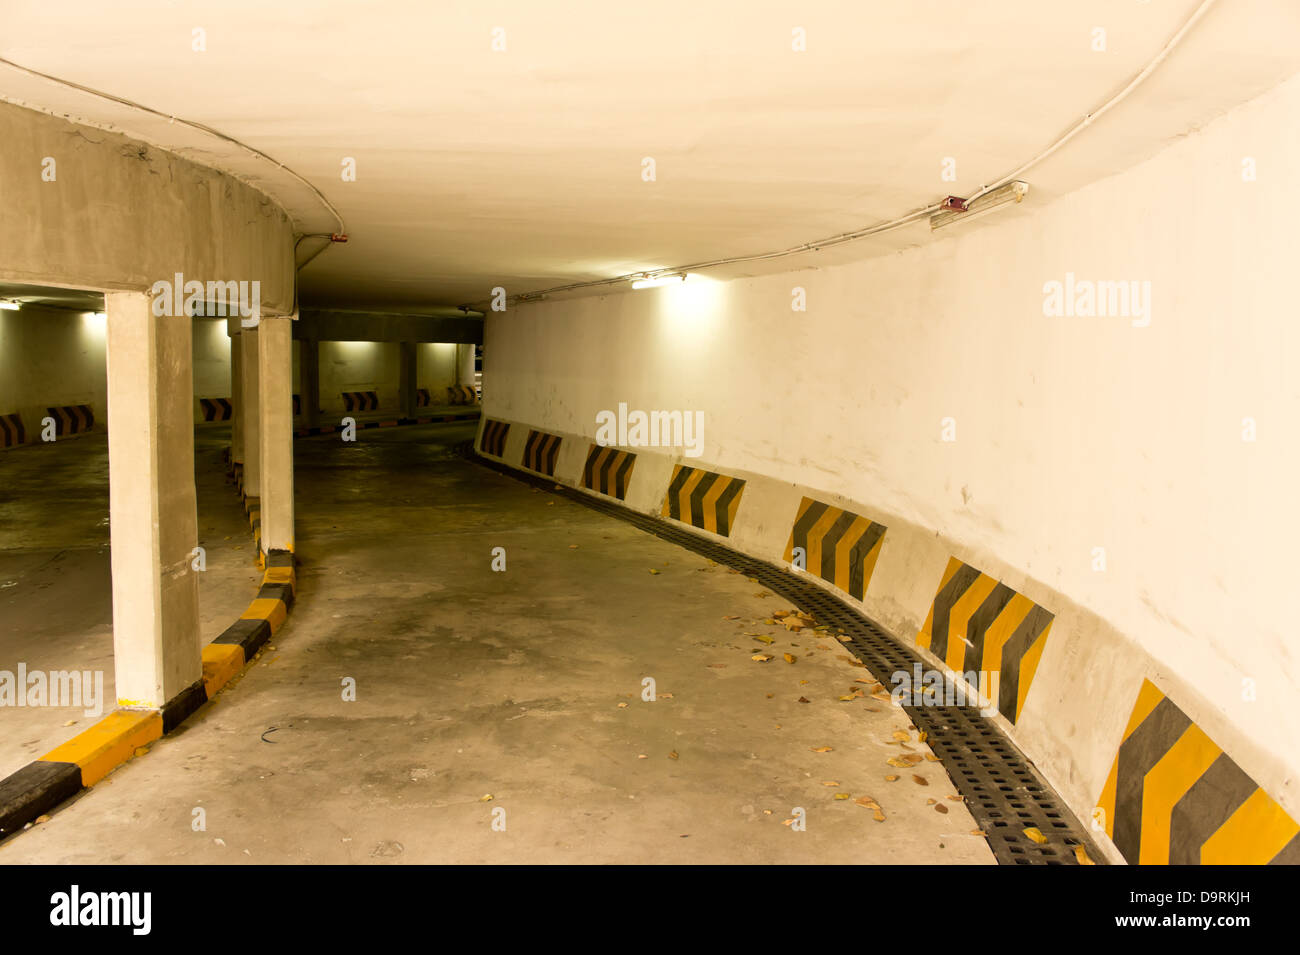 The entrance of an underground parking lot Stock Photo